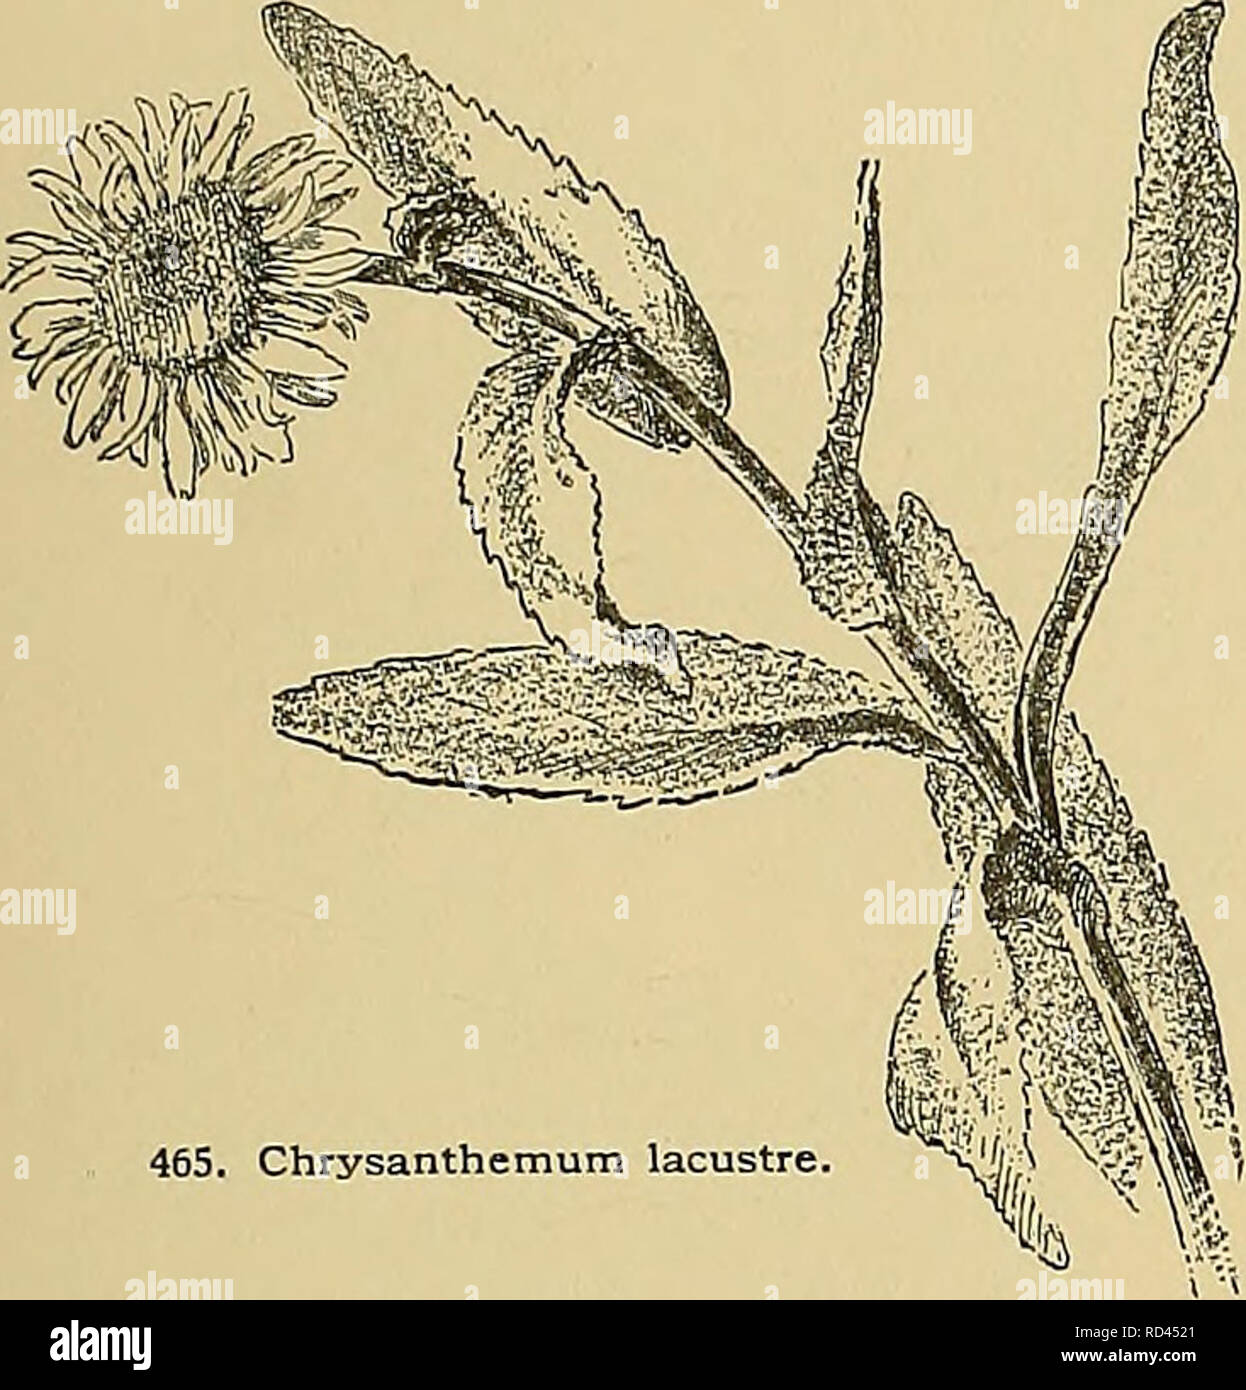 . Cyclopedia of American horticulture, comprising suggestions for cultivation of horticultural plants, descriptions of the species of fruits, vegetables, flowers, and ornamental plants sold in the United States and Canada, together with geographical and biographical sketches. Gardening. CHRYSANTHEMUM AA. Lvs. not cut to the midrih : the primary incisions shallow. B. Fls. home in flat-topped oUisters. 12. Balsimita,Willd. (Tanacetum Balsdmita,lAmi.). Tall and stout : lvs. sweet-scented, oval or oblong, ob- CHRYSANTHEMUM 313. 465. Chrysanthemum lacustre. tuse, margined with blunt or sharp teeth, Stock Photo